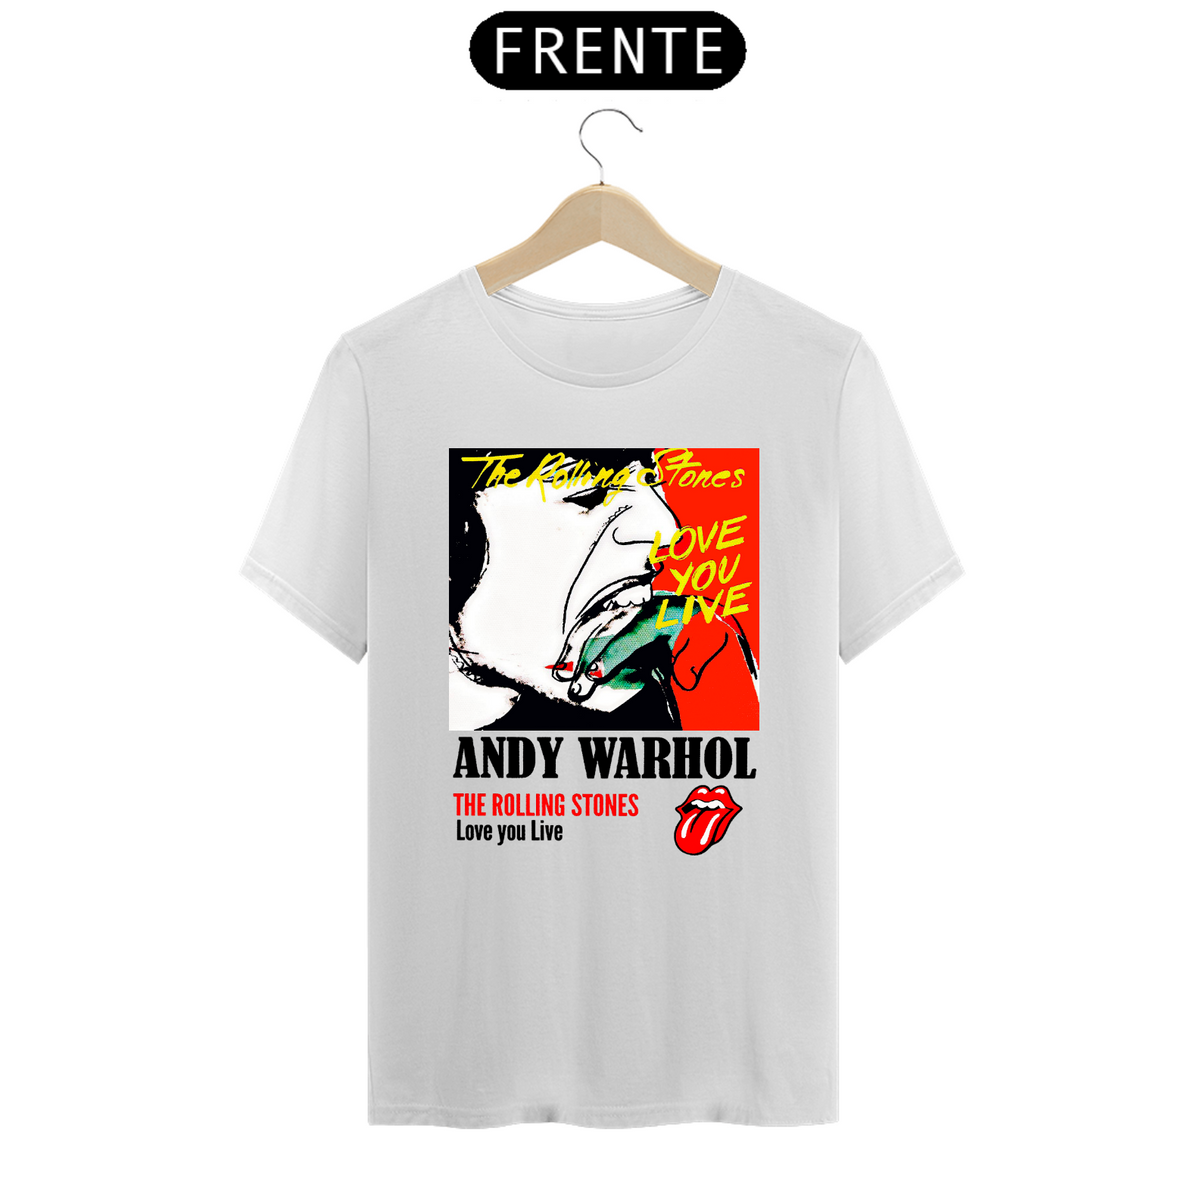 Nome do produto: Andy Warhol The Rolling Stones Prime